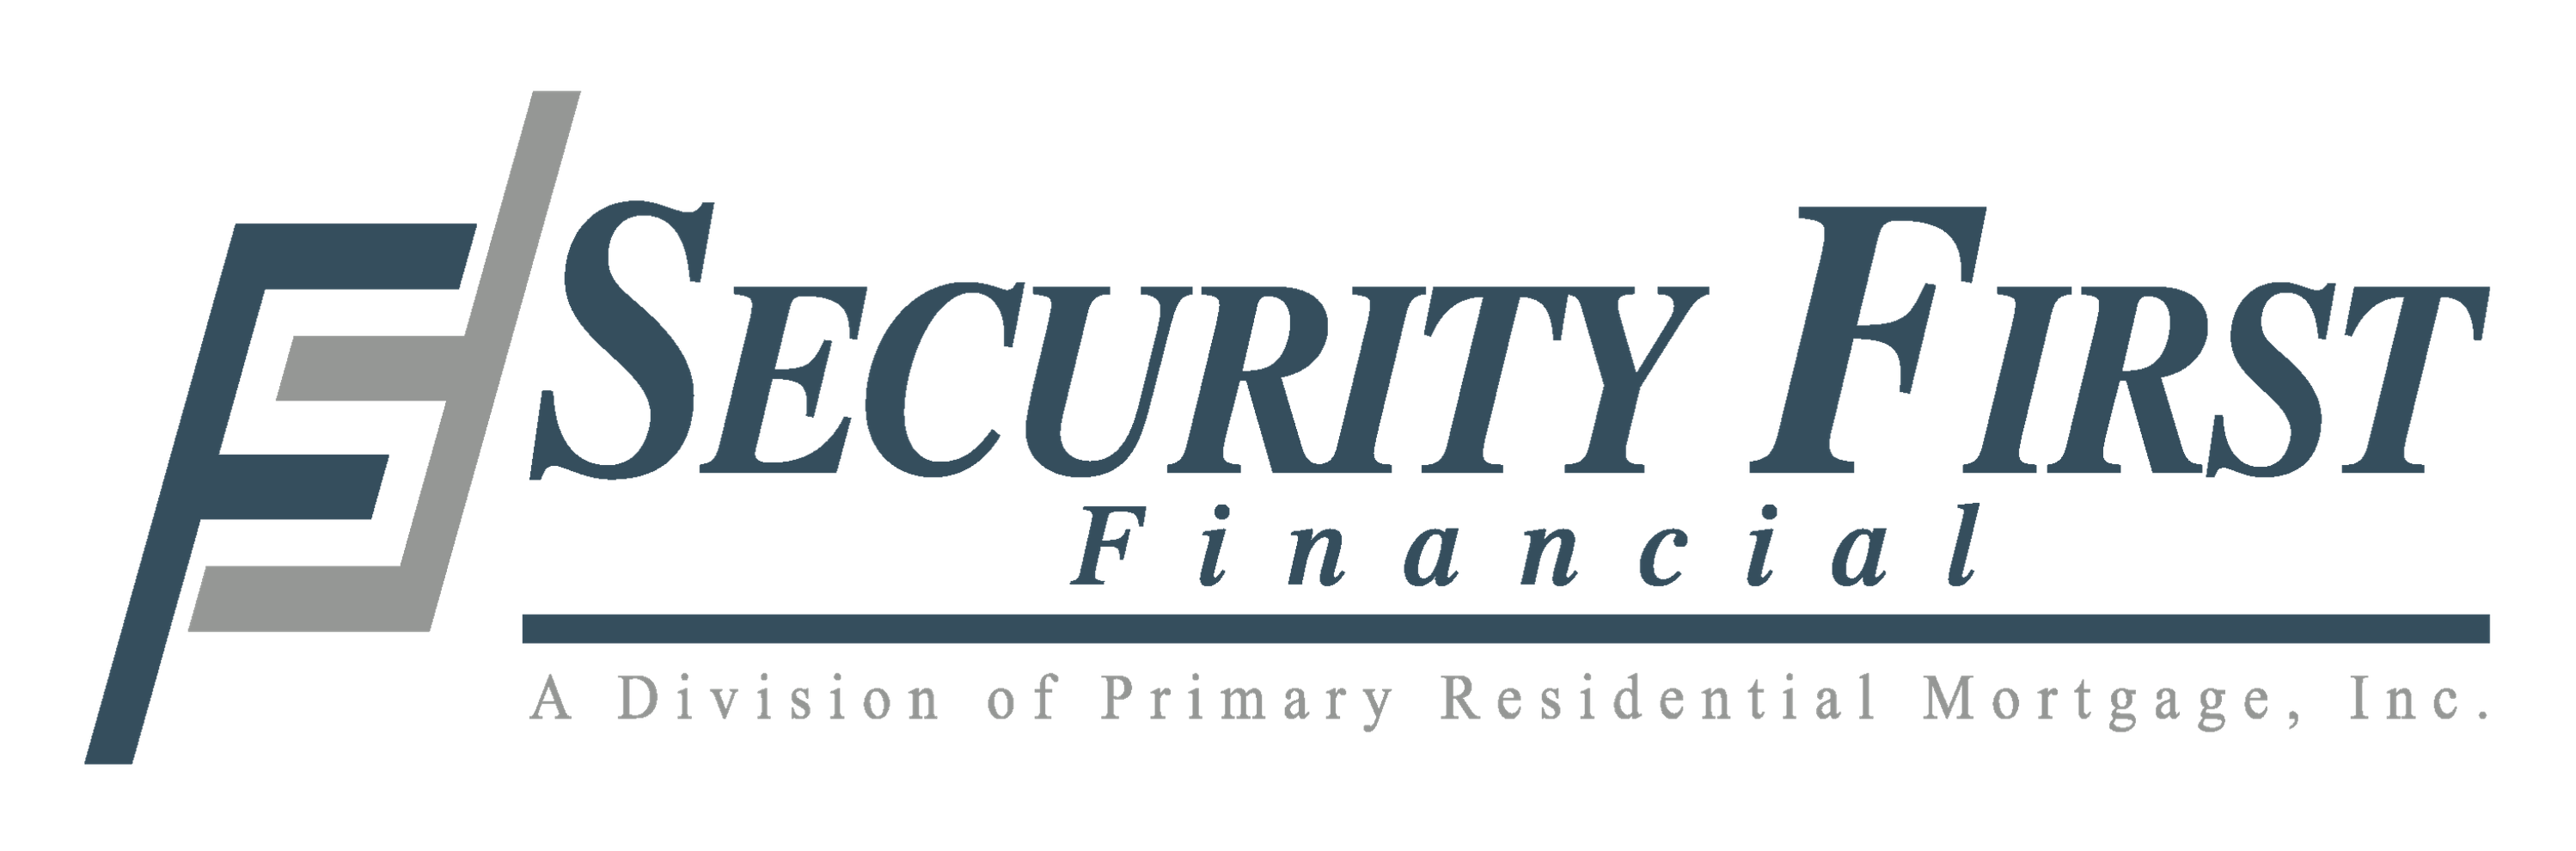 Security First Financial, A Division of Primary Residential Mortgage, Inc. Logo